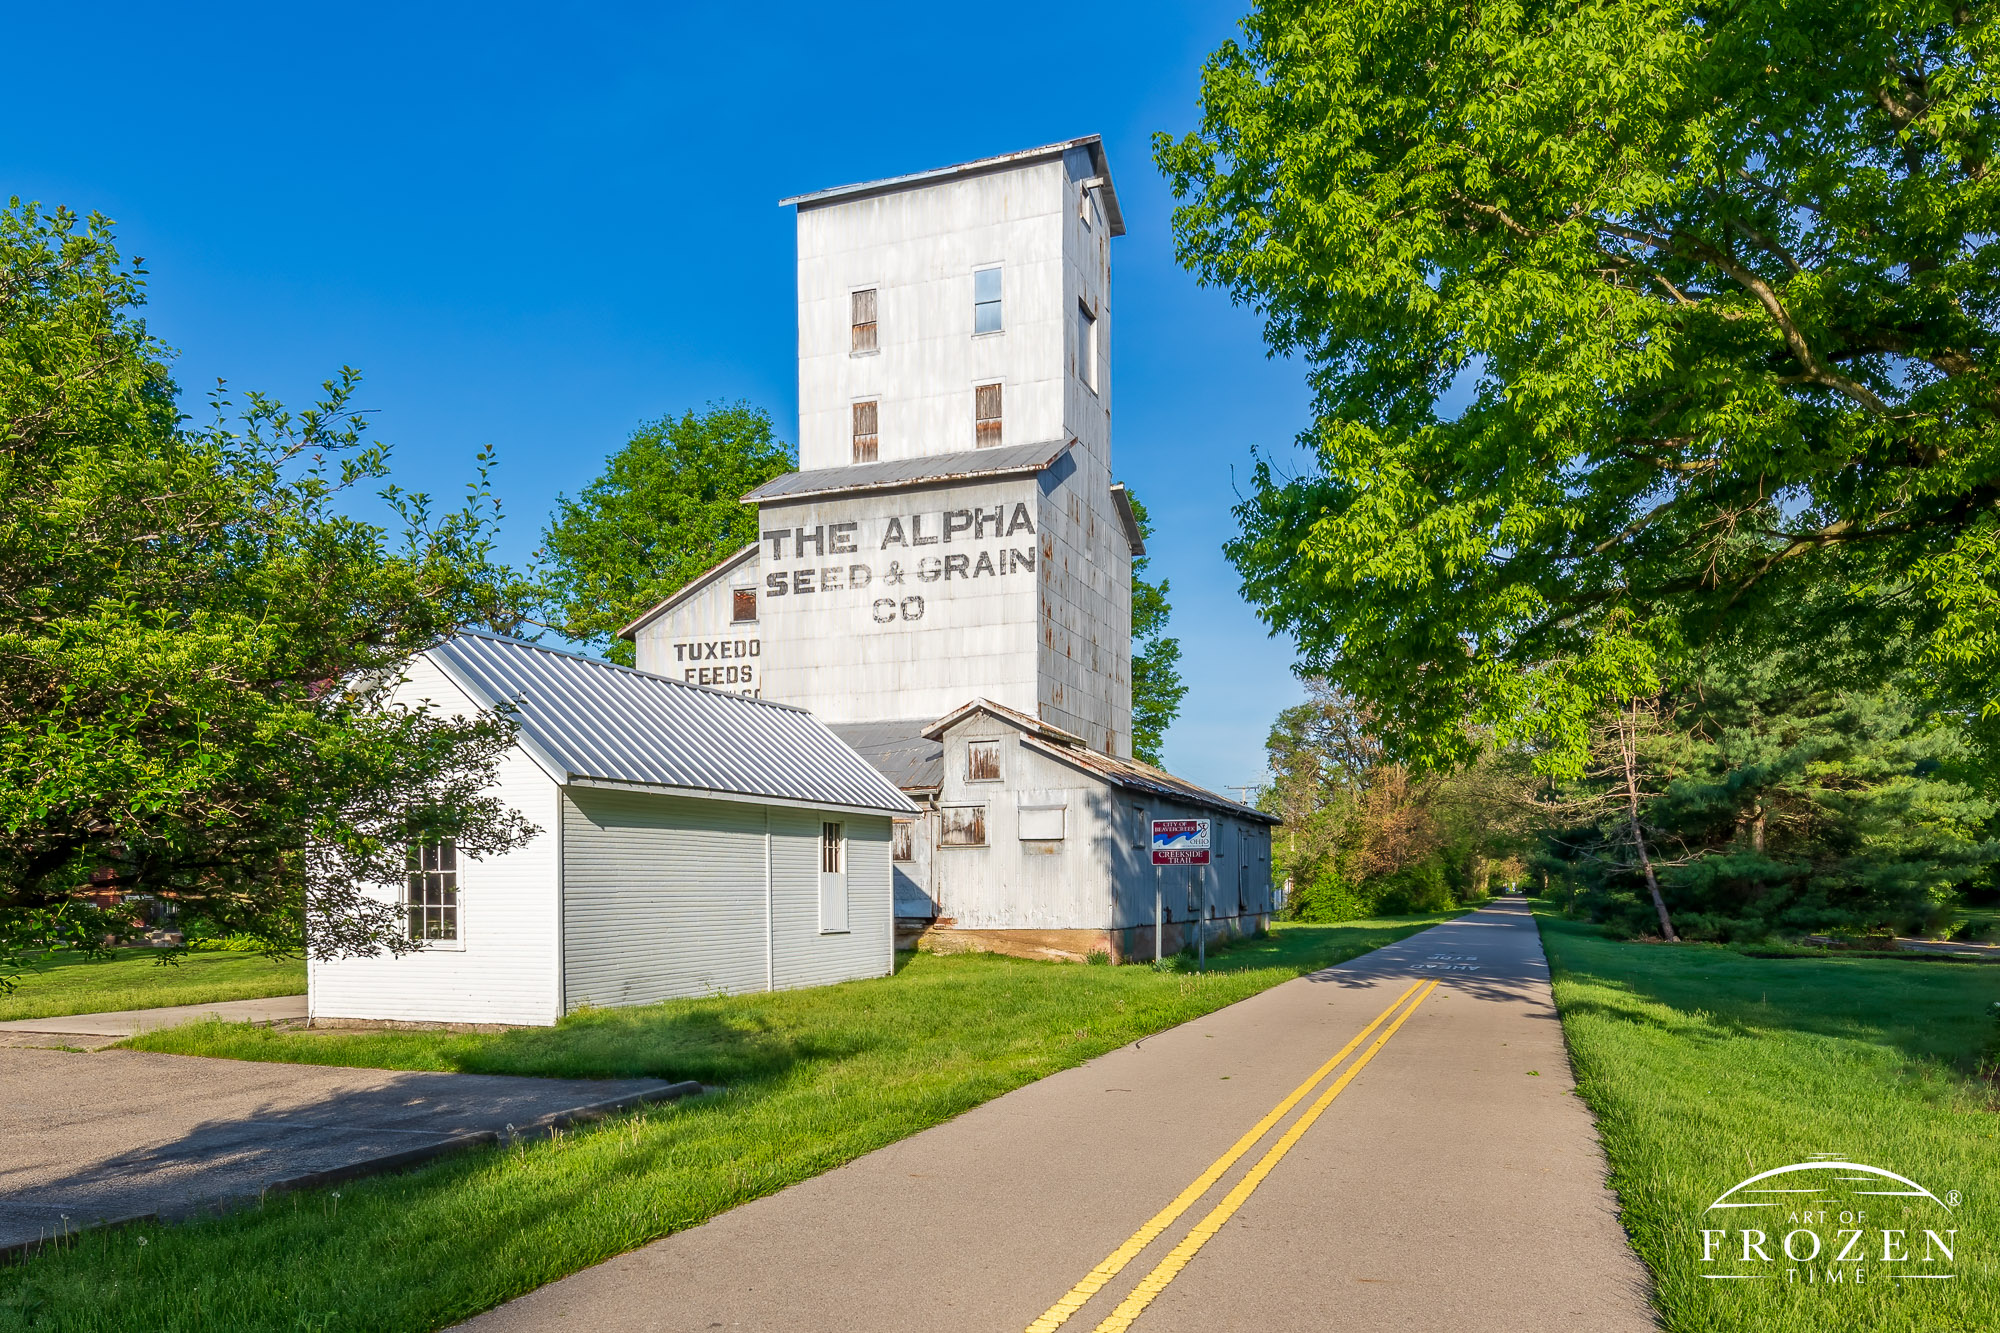 An old grain elevator resides next to a bike path which runs off to the distant horizon as lush green vegetation lines the path lying under crystal-clear skies